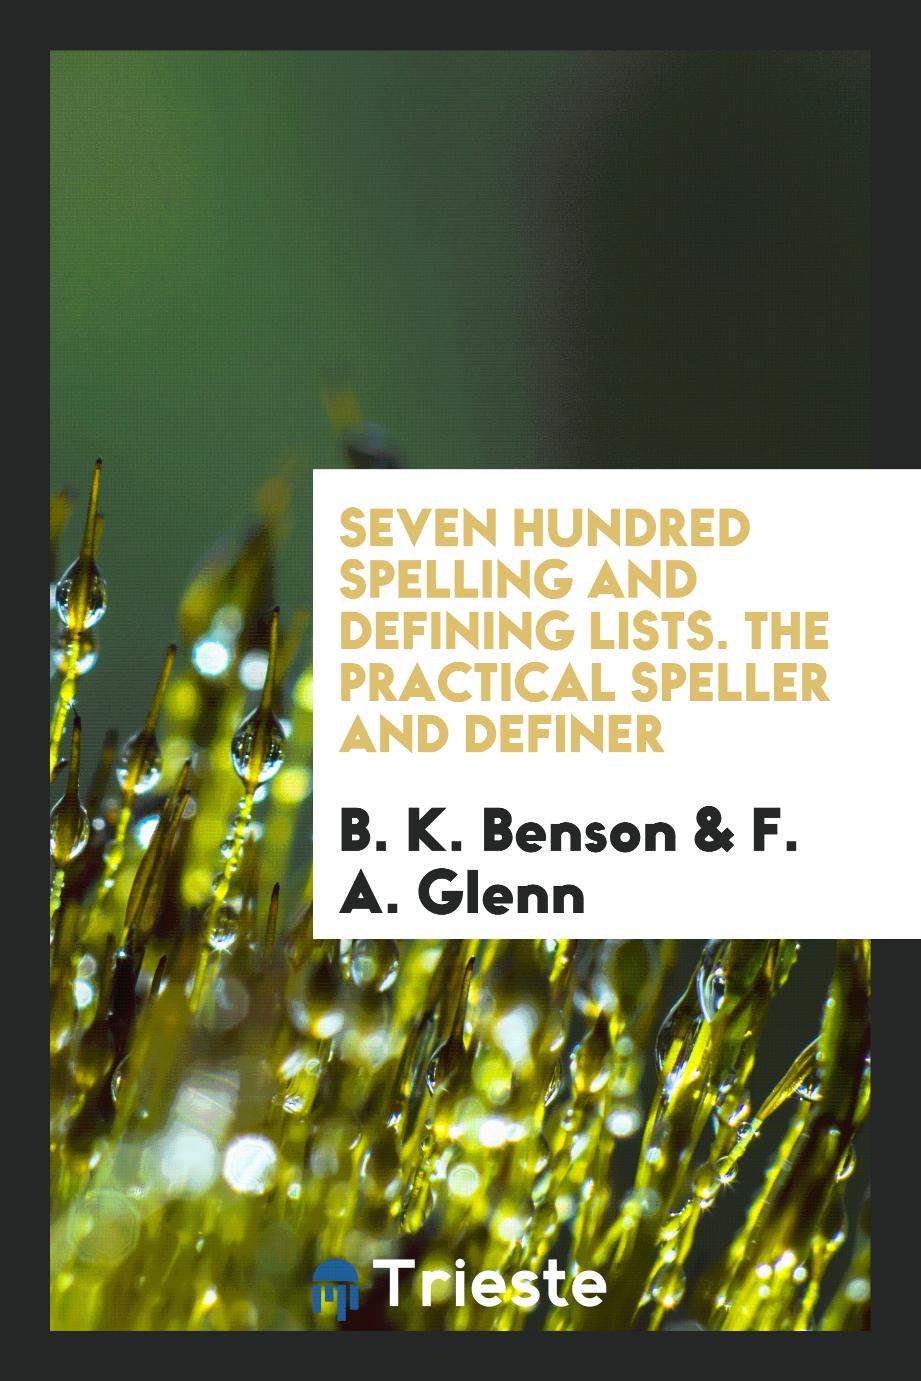 Seven Hundred Spelling and Defining Lists. The Practical Speller and Definer